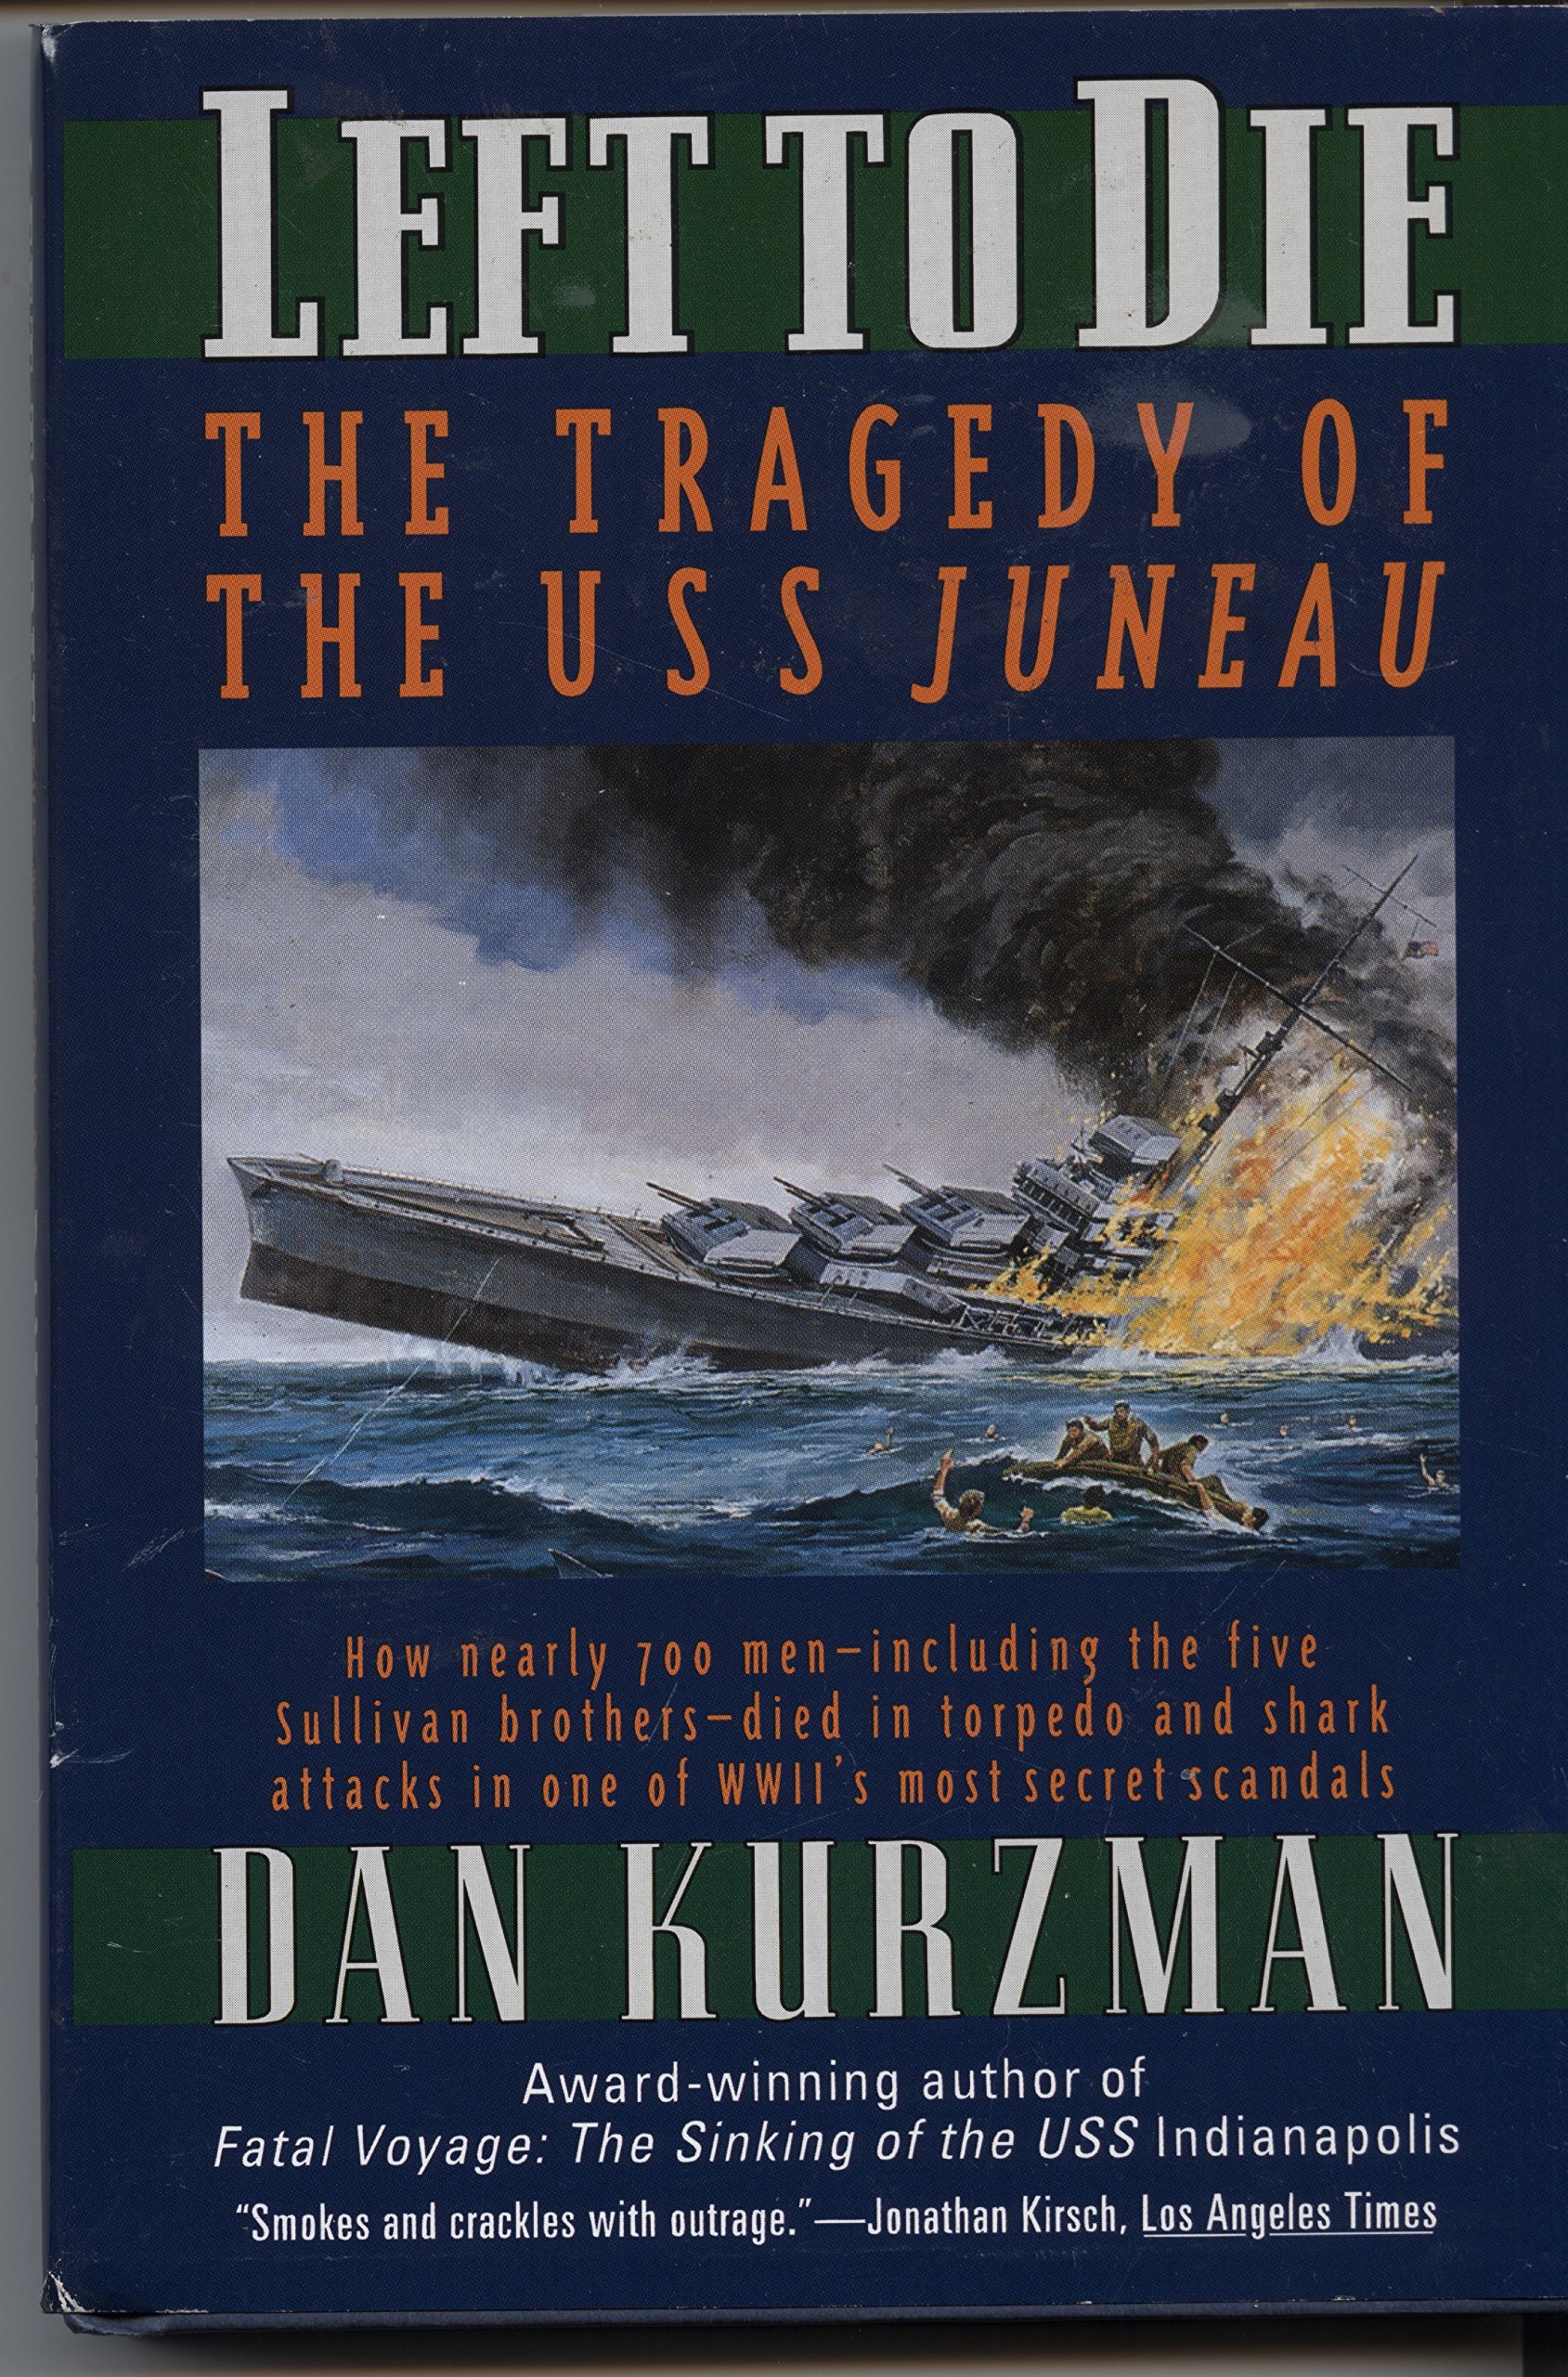 Left to Die: The Tragedy of the USS Juneau